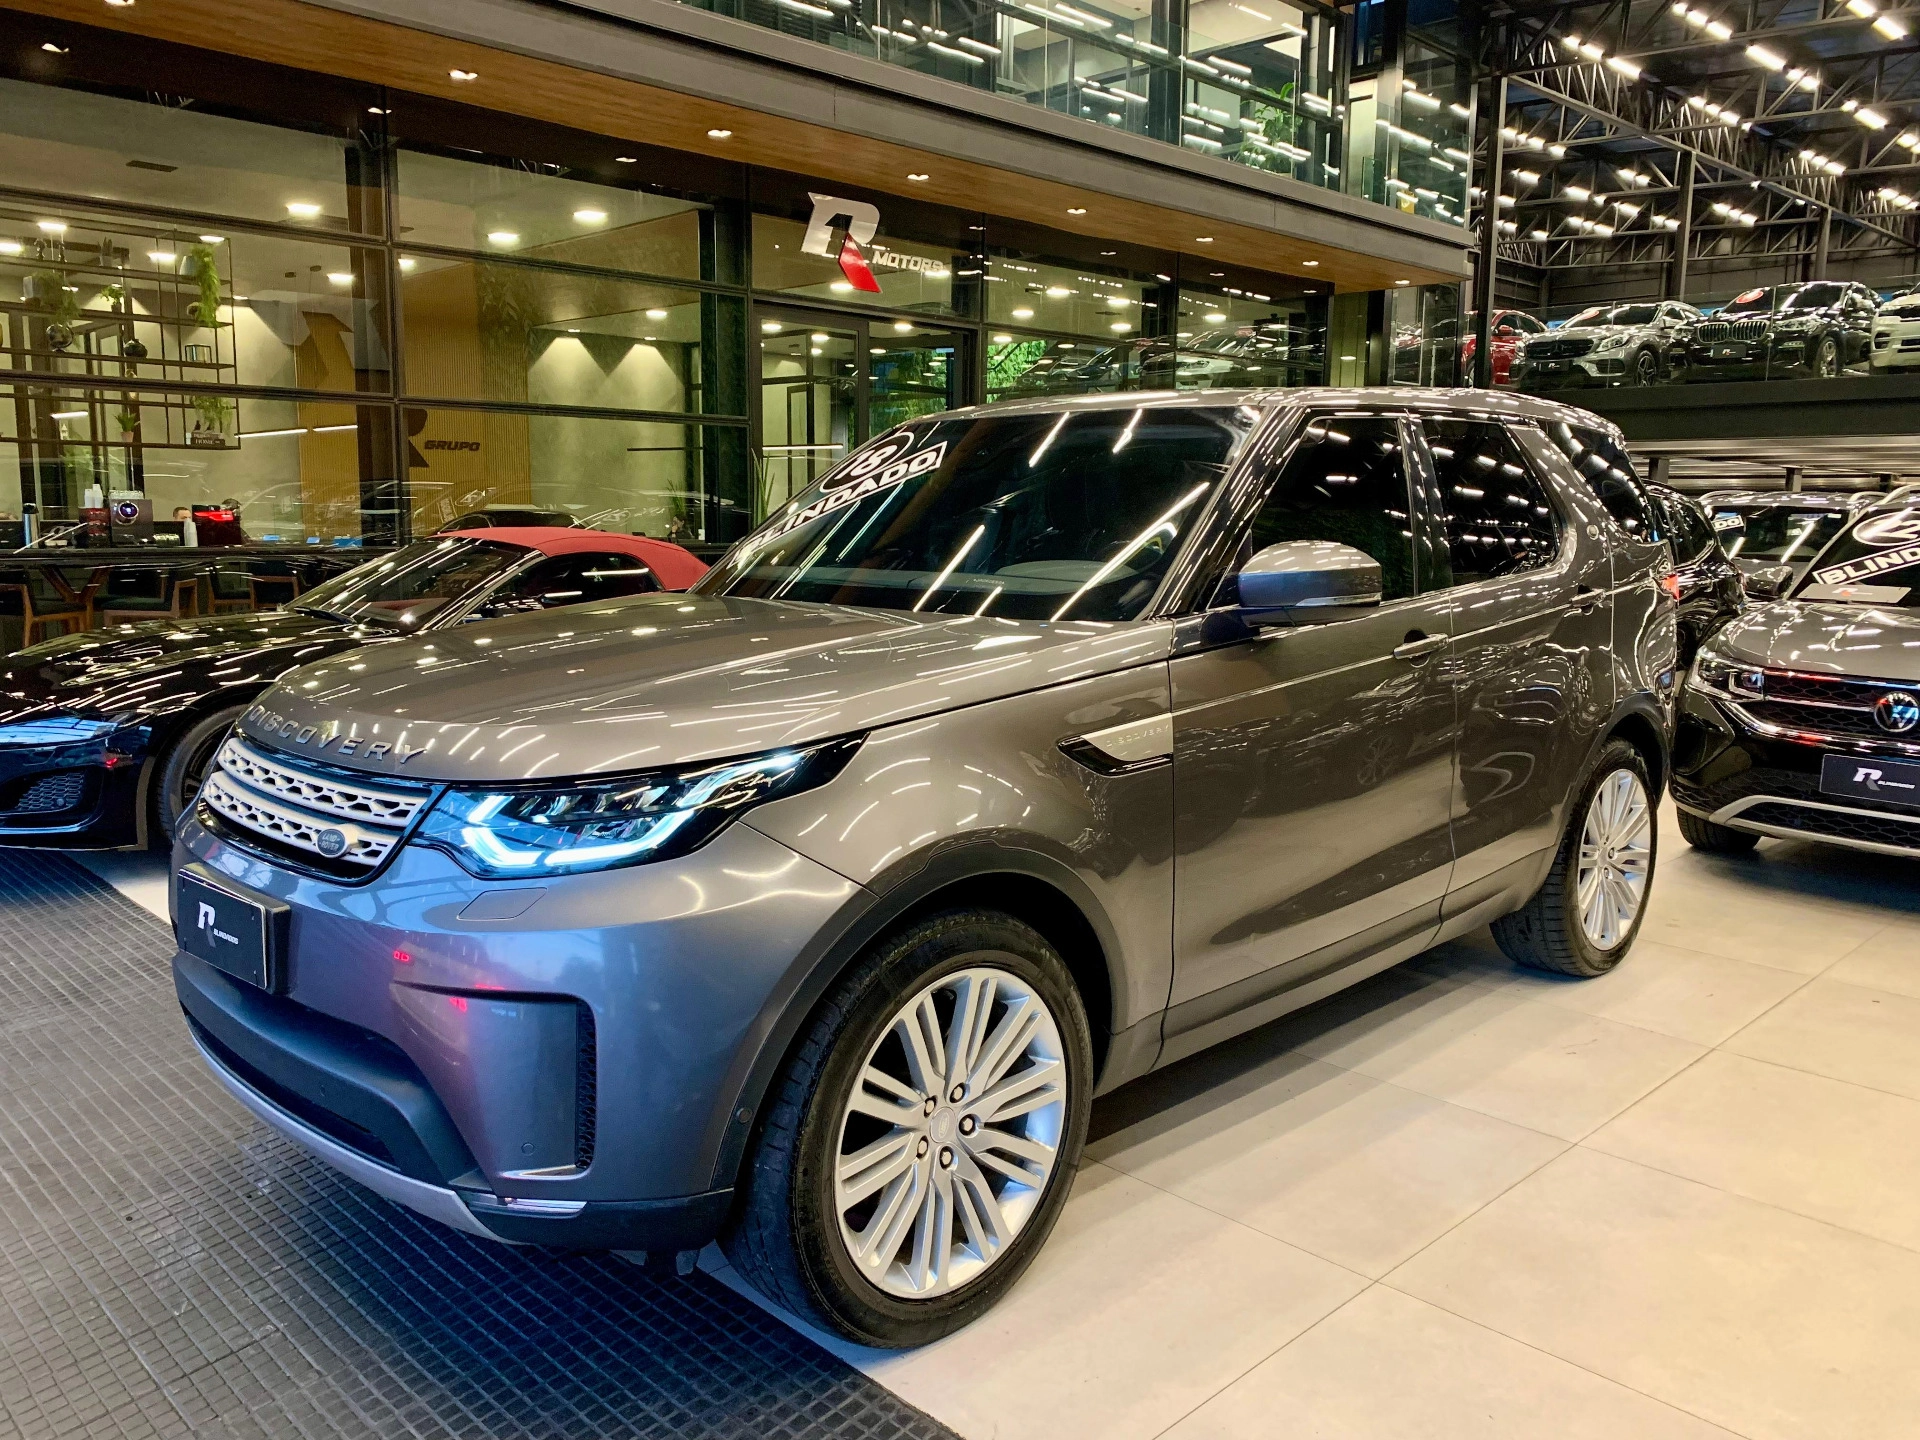 land rover DISCOVERY 3.0 V6 TD6 DIESEL HSE 4WD AUTOMÁTICO 2018